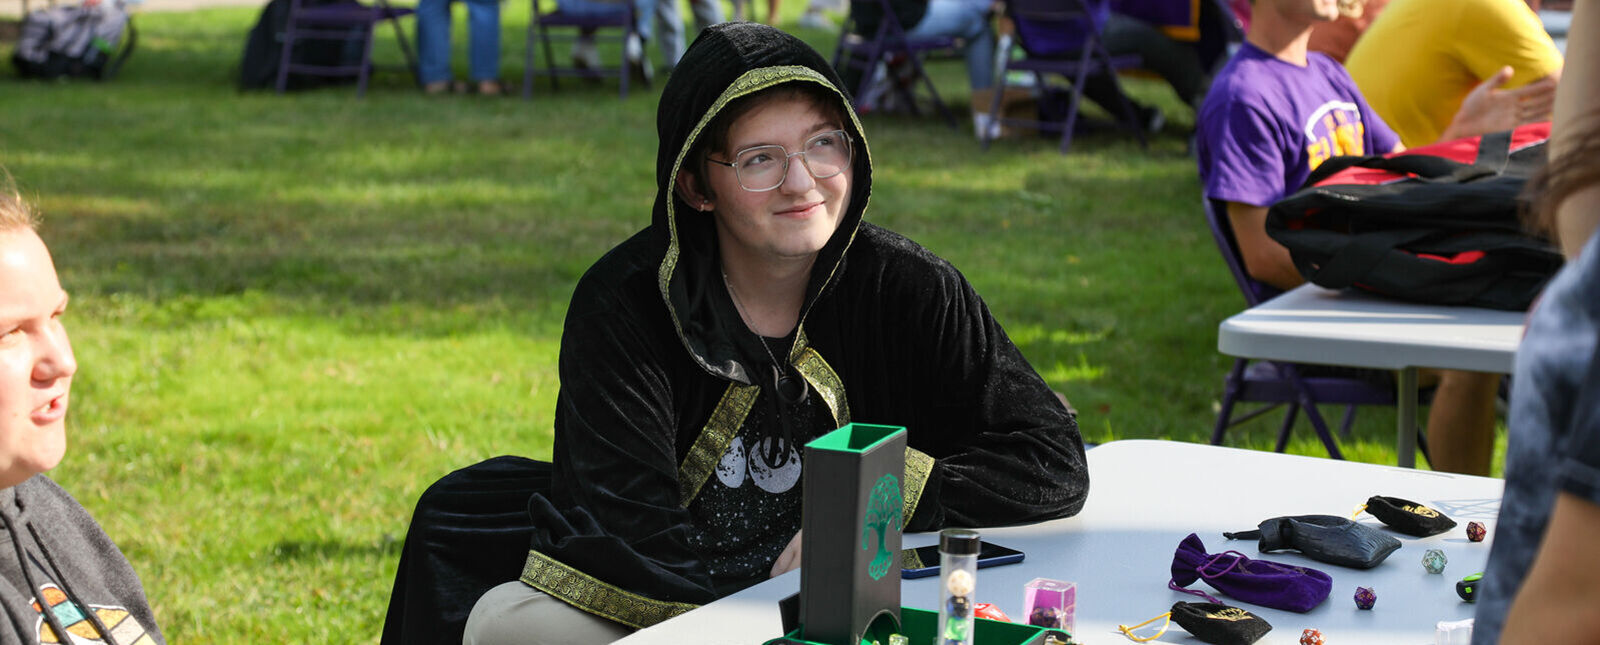 A student greets visitors to the Dungeons and Dragons Club table during an activities fair